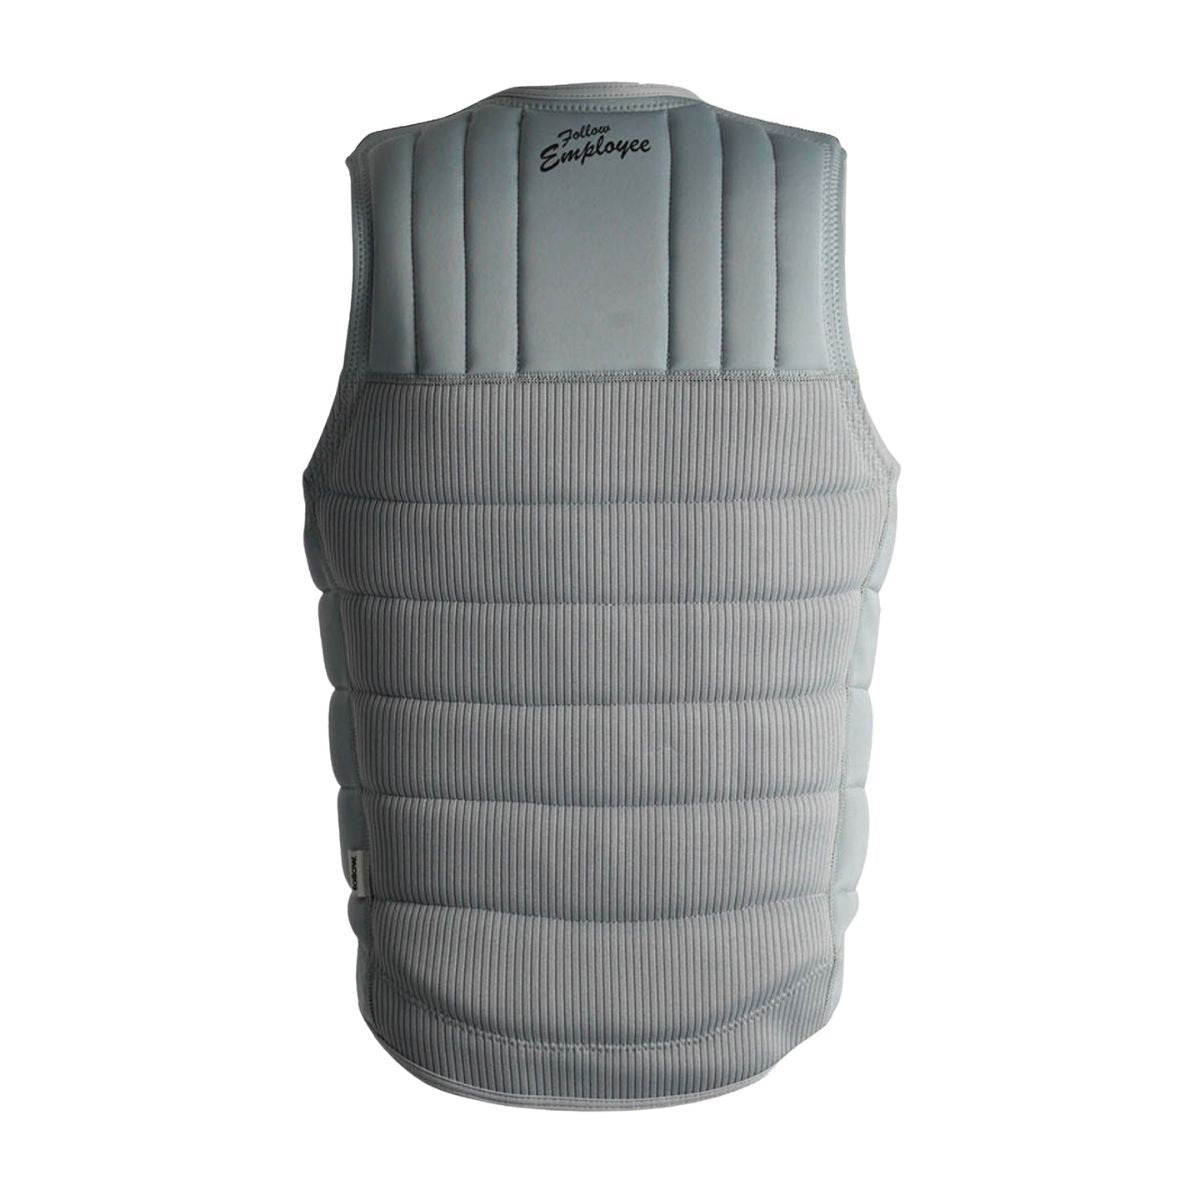 Follow Employee of the Month Comp Wake Vest in Grey - BoardCo